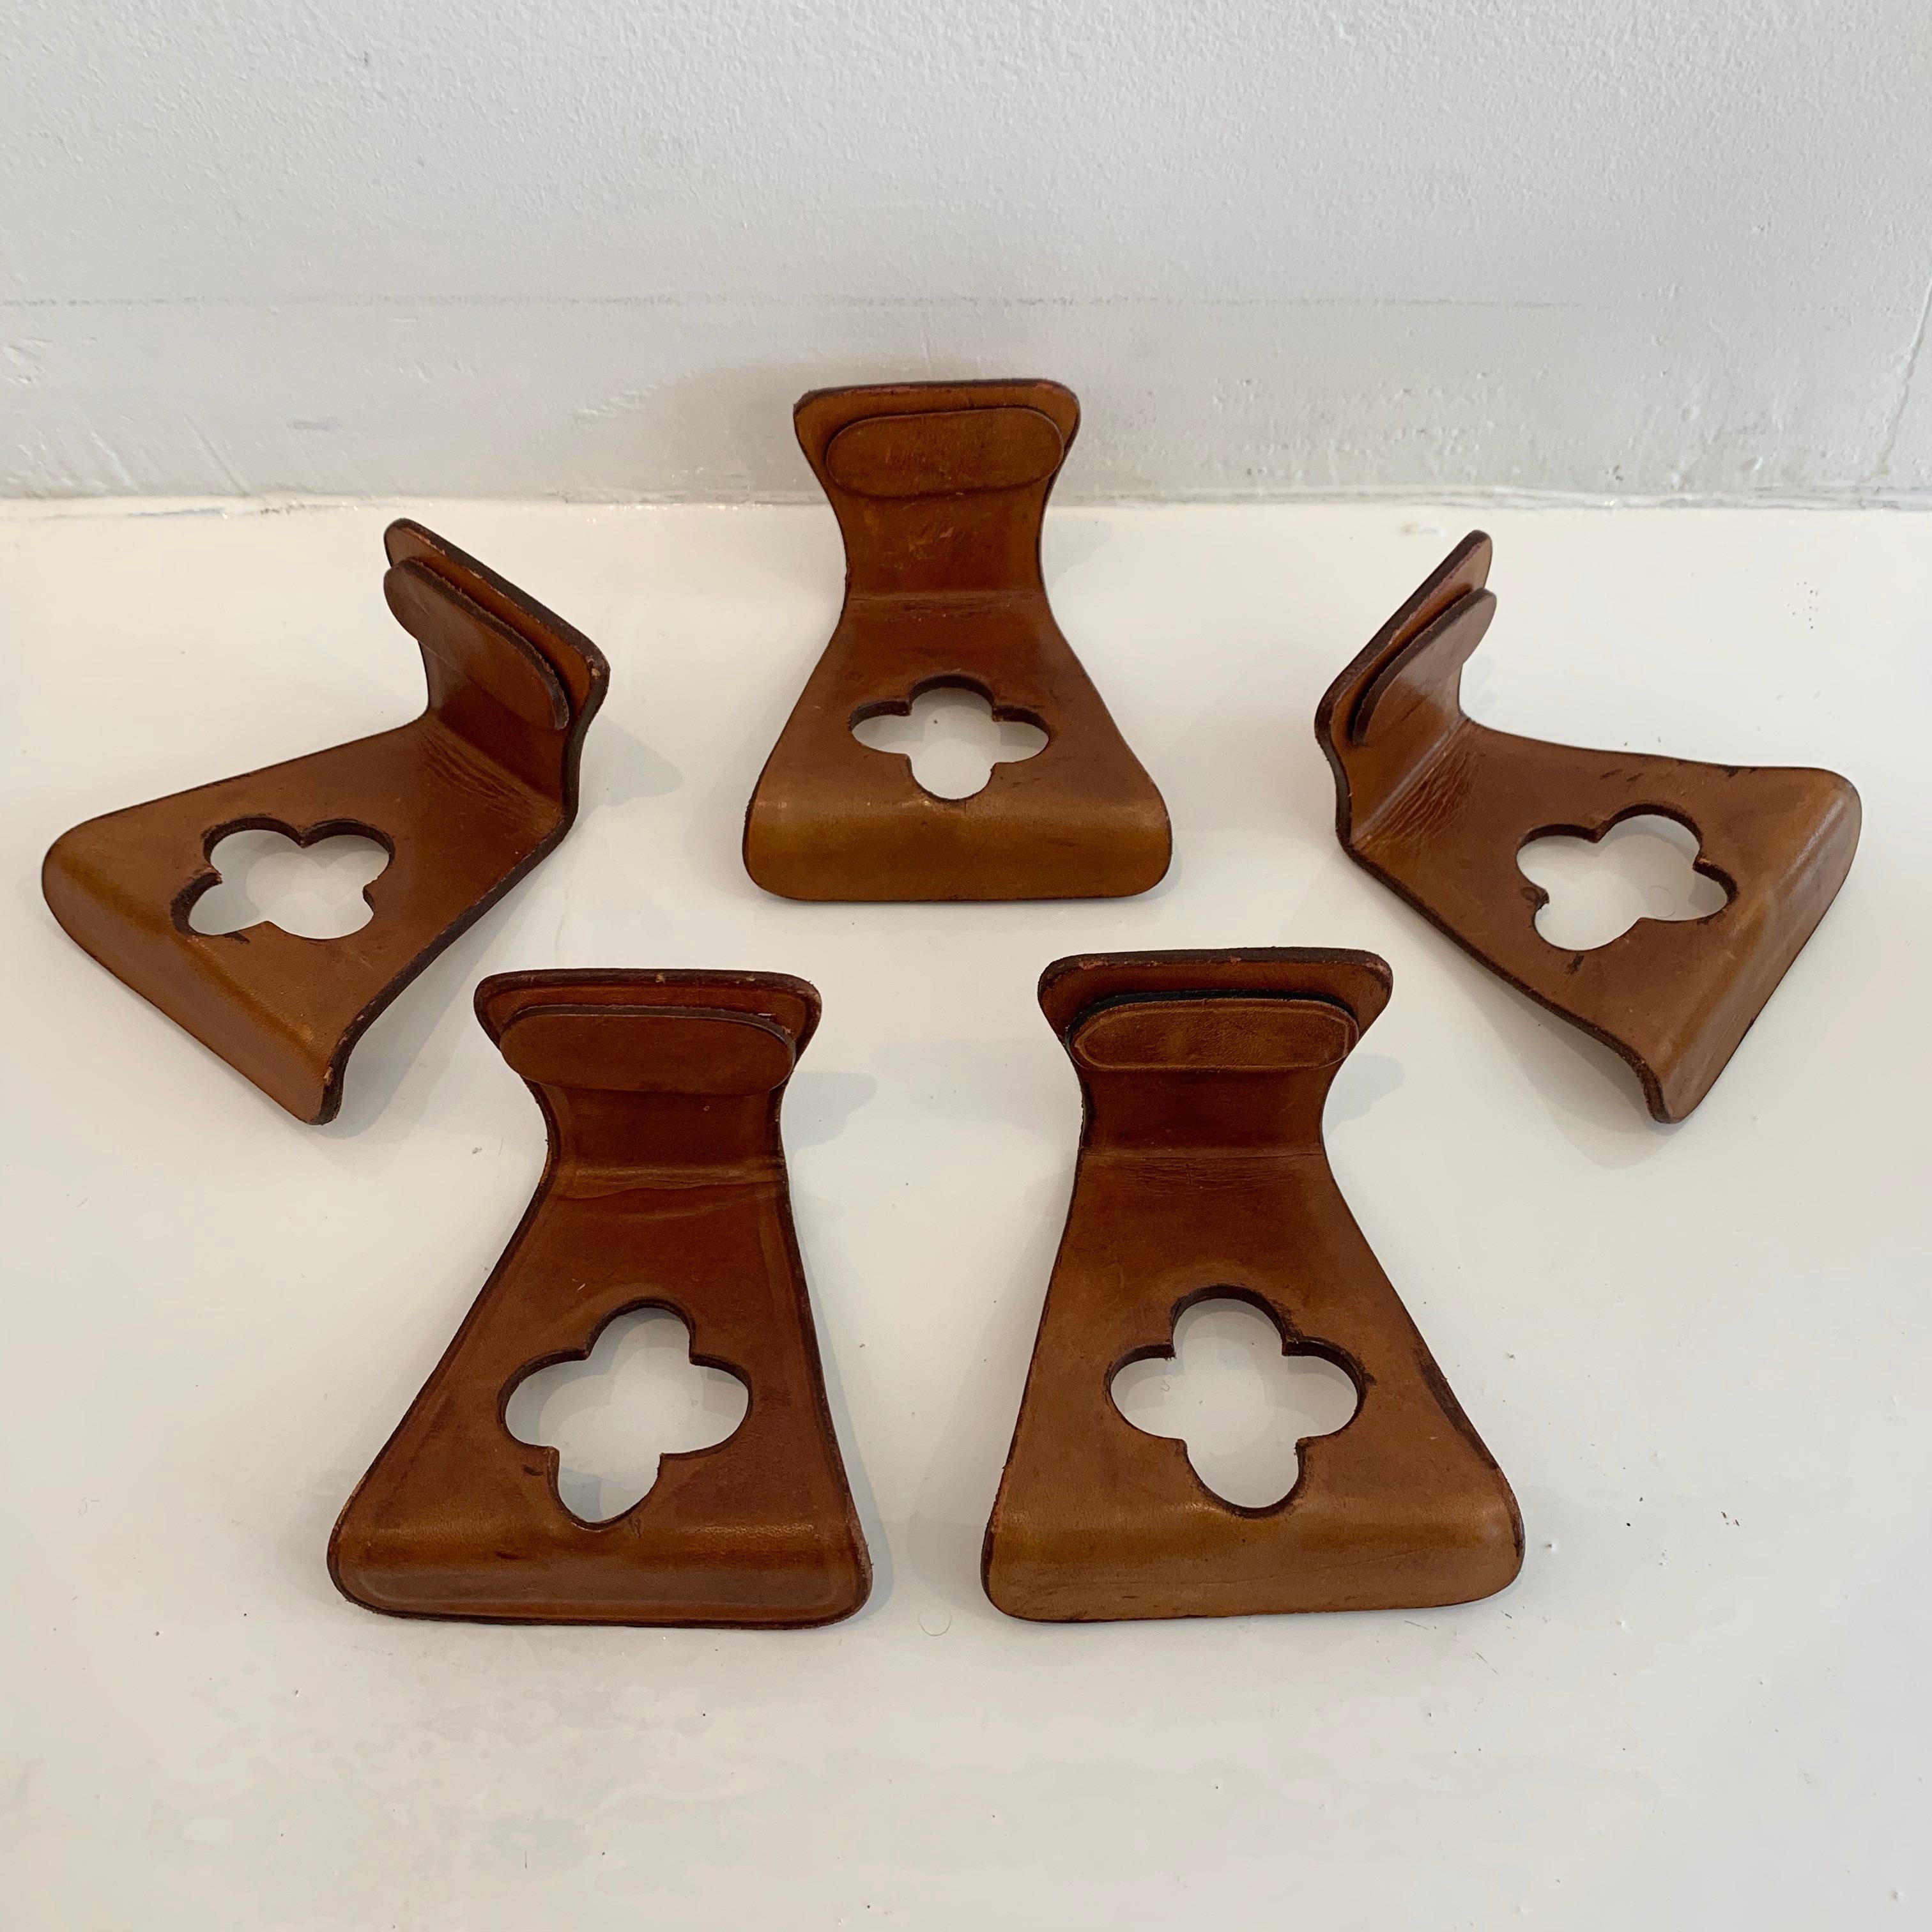 Gorgeous set of French leather hooks in saddle leather. 5 available. Priced individually. Tongue shape with 4 leaf clover cutout. Super functional and unusual design. Small removable leather tab with magnetic back covers screw holes into the wall.